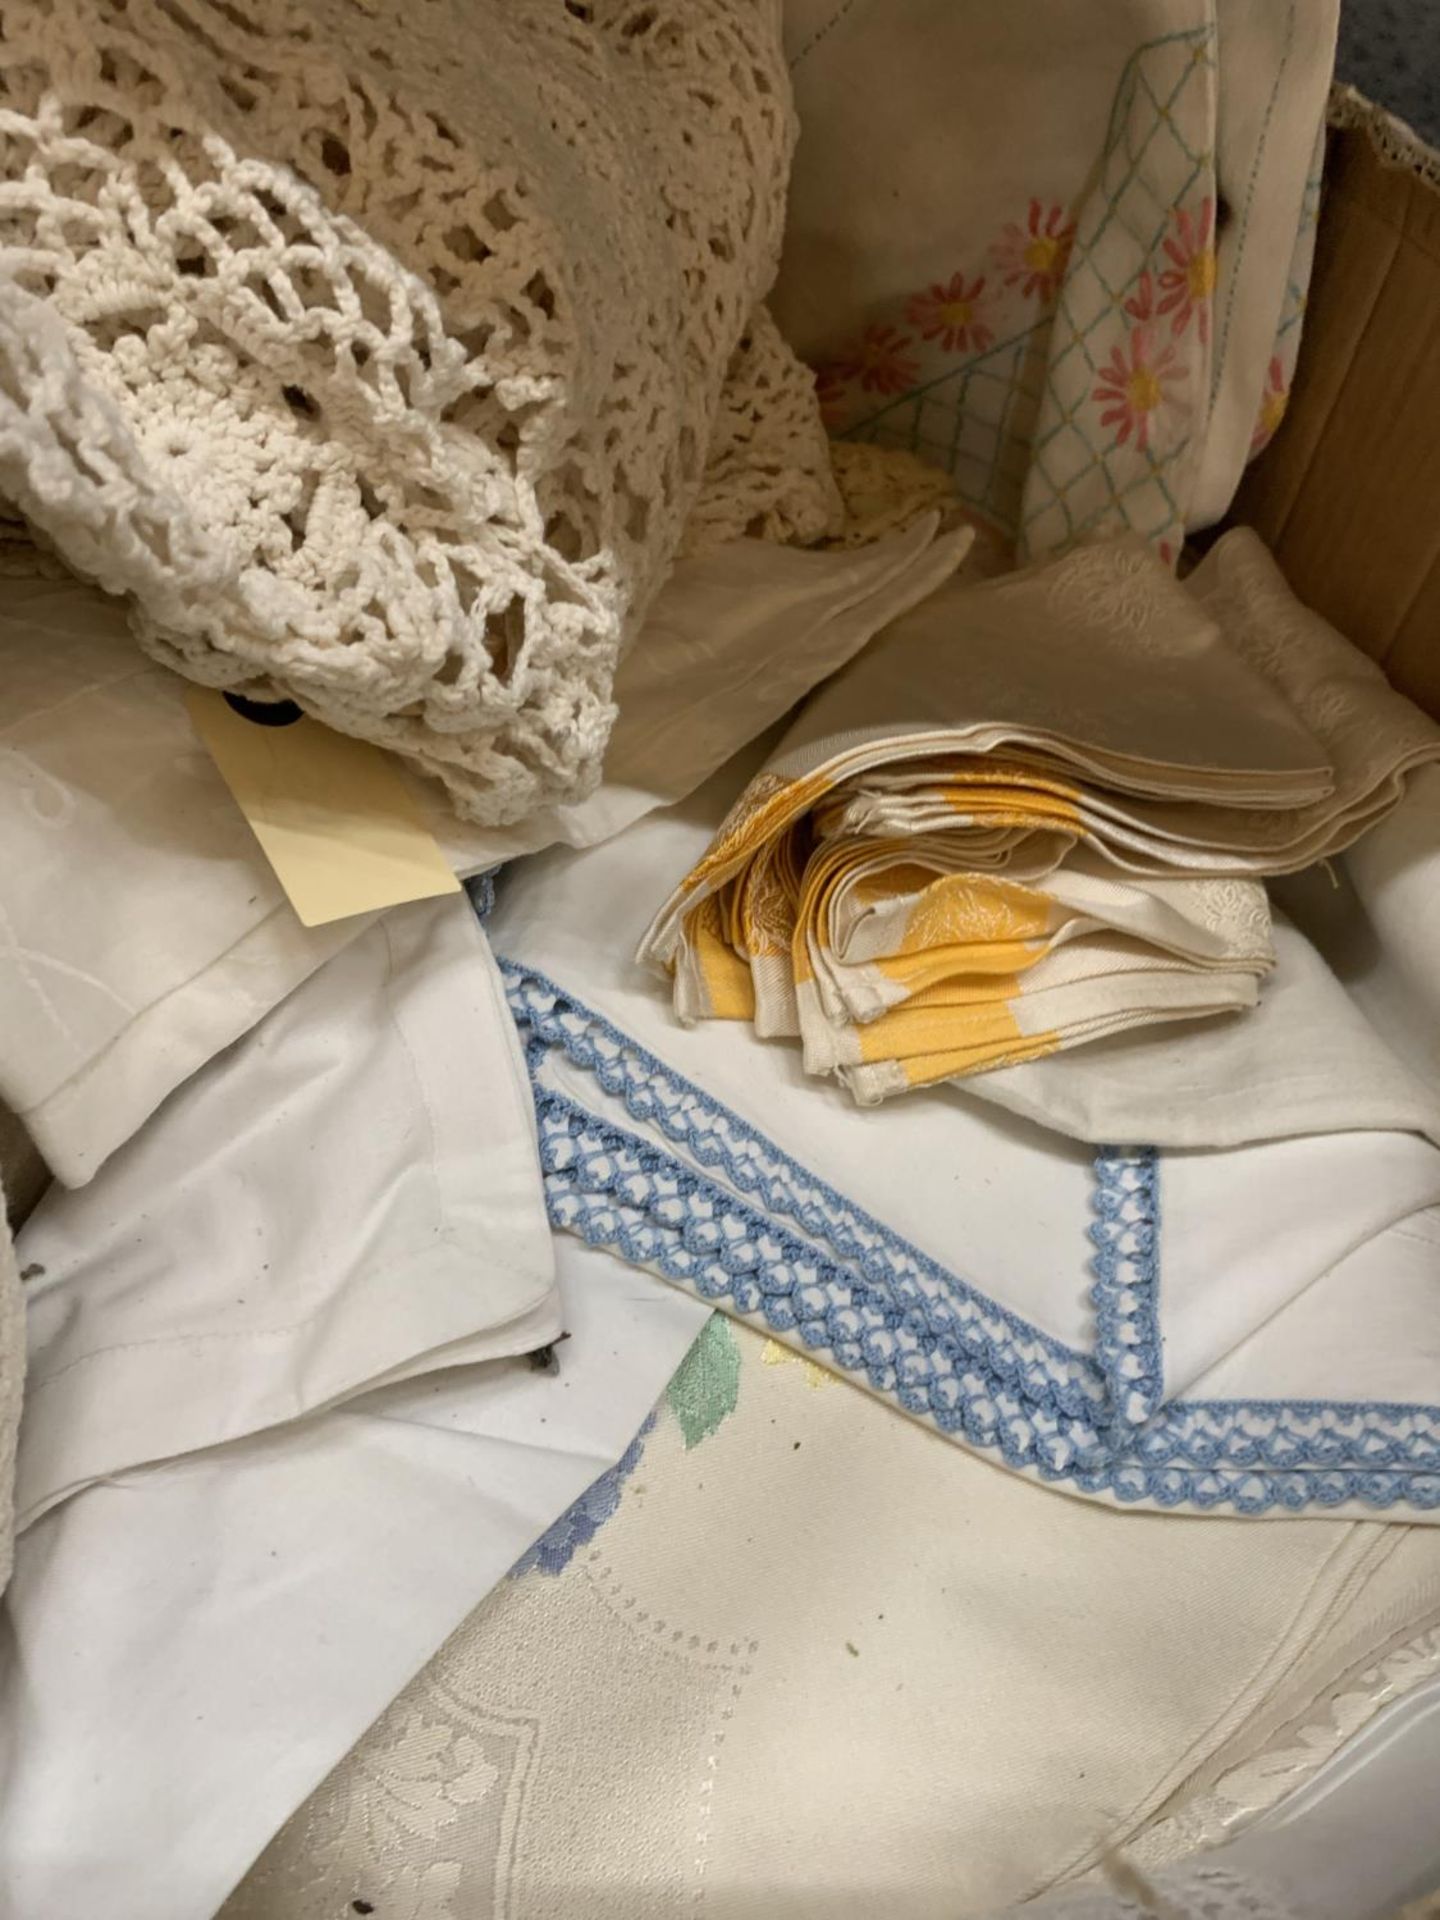 A LAGE QUANTITY OF VINTAGE LINEN AND COTTON TO INCLUDE TABLECLOTHS, PLACEMATS, ETC